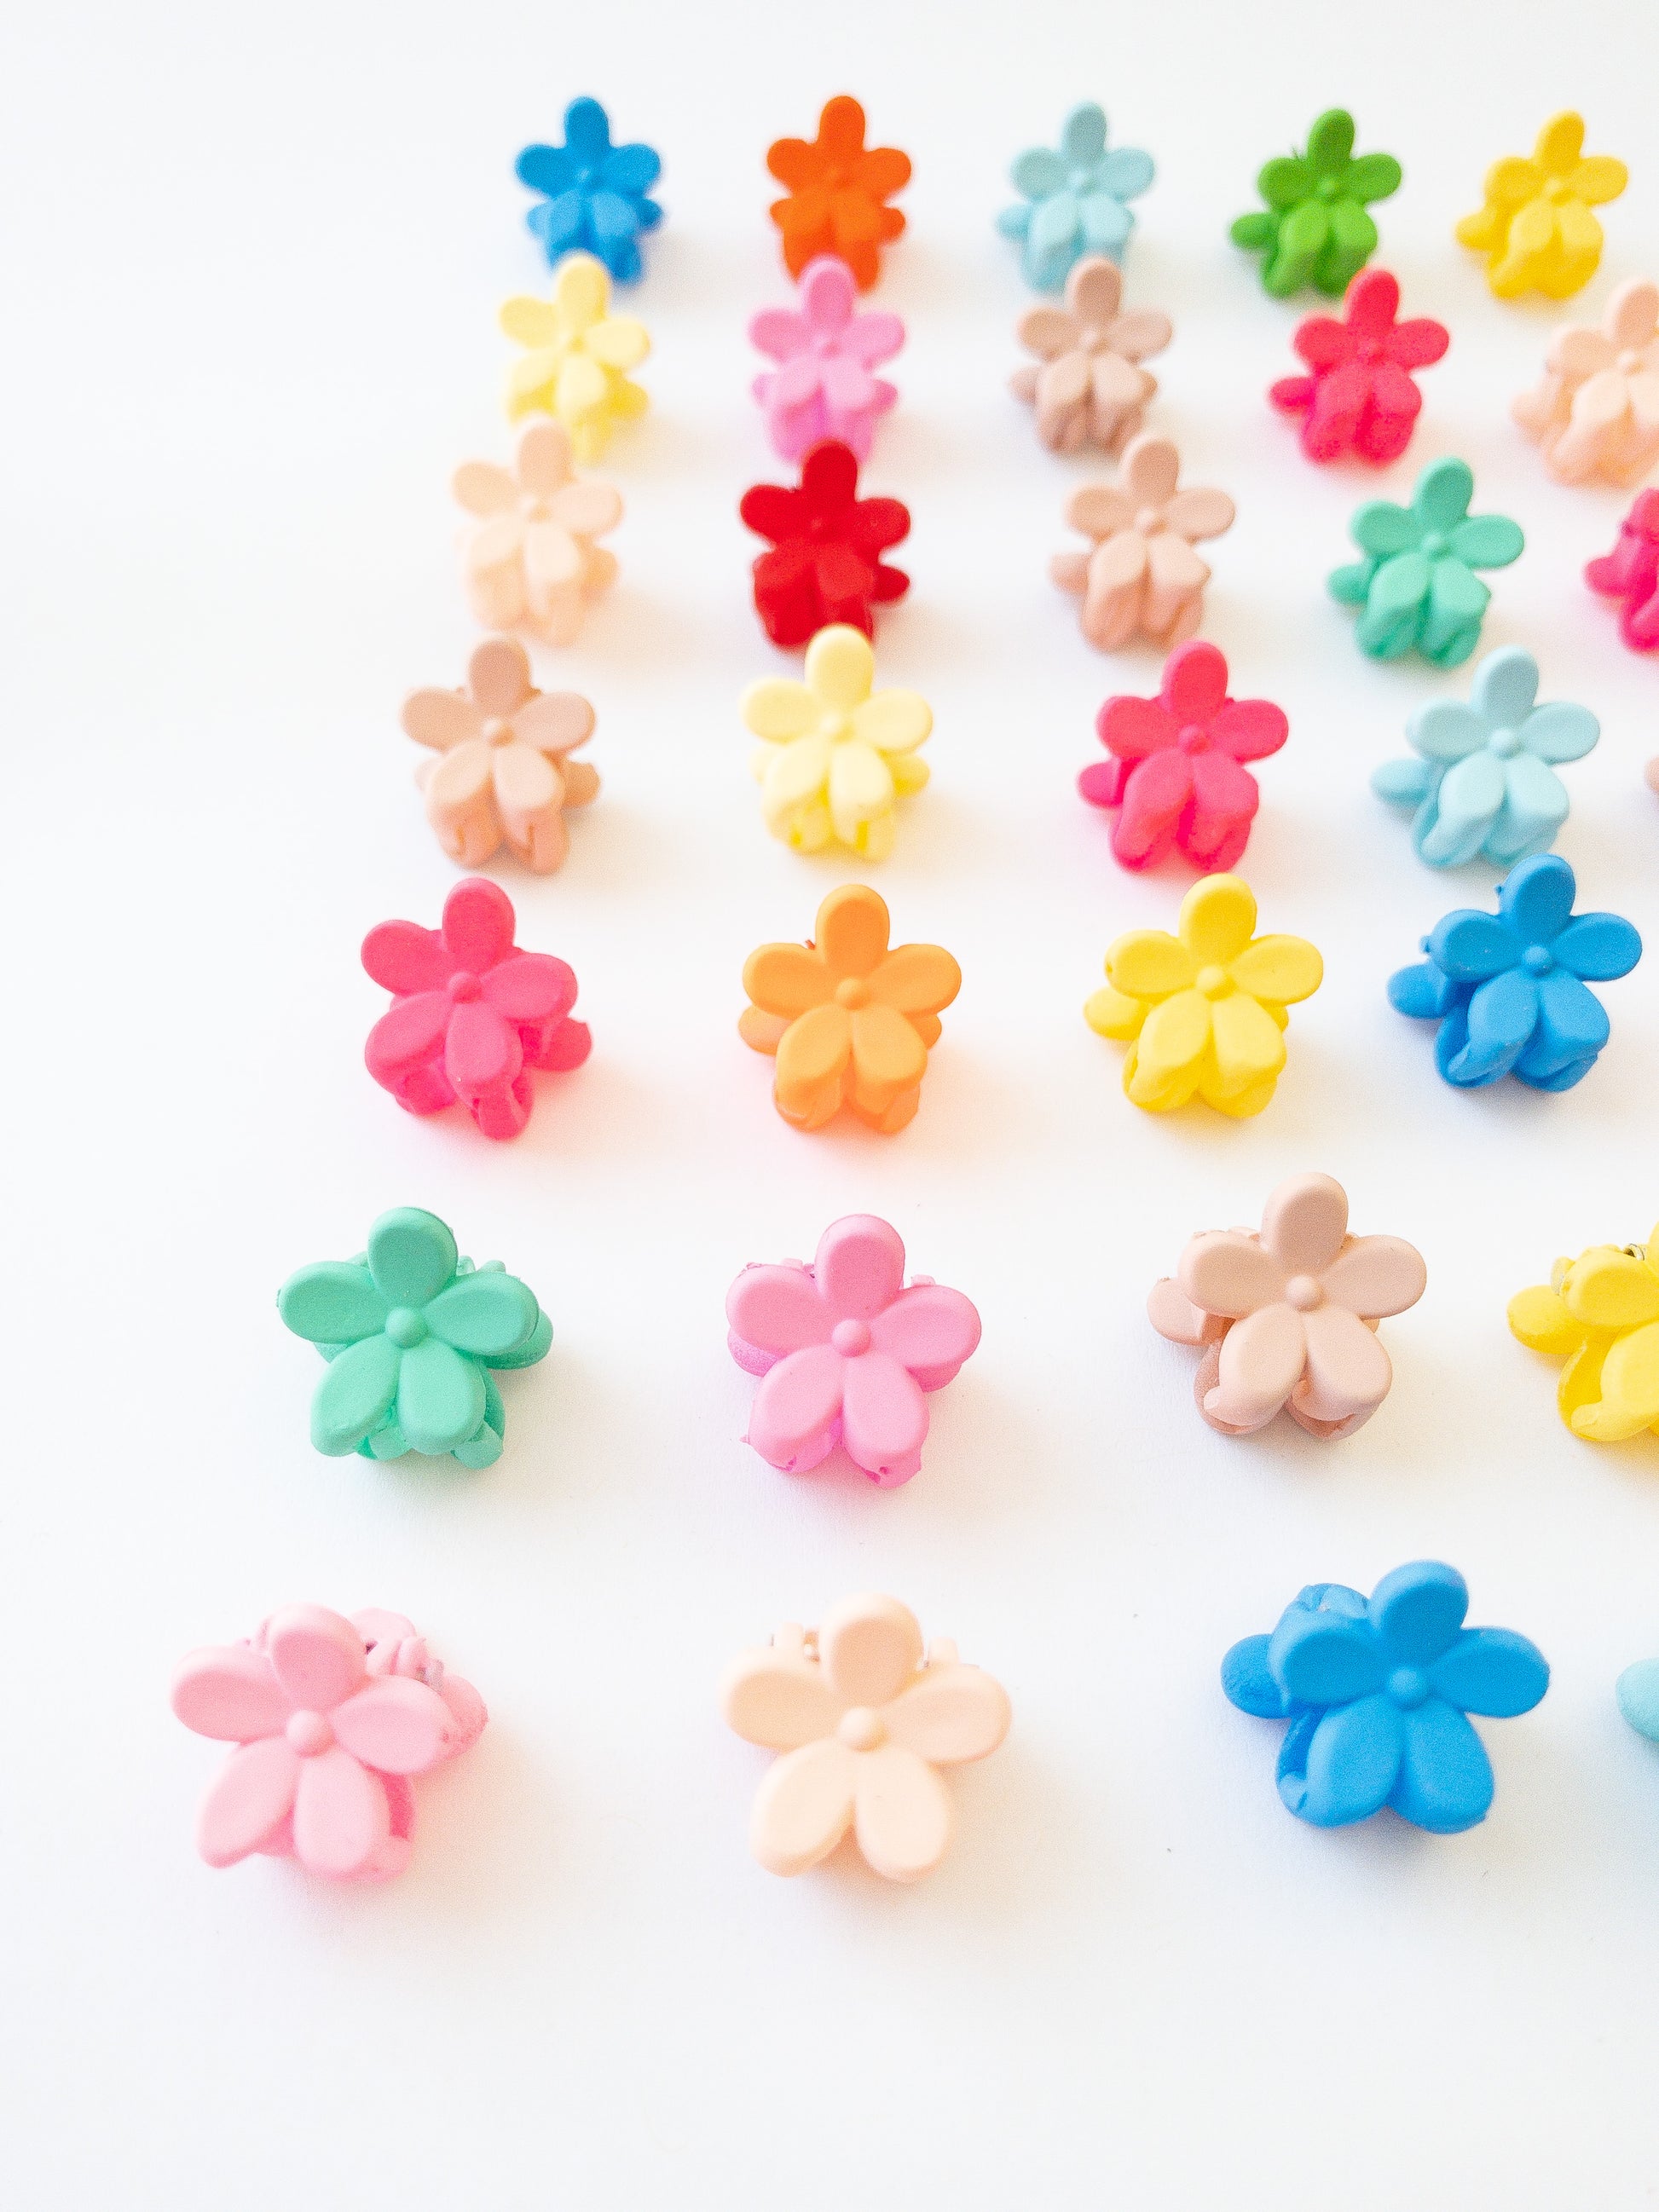 Our signature Korean style mini flower hair clips! Each hair clip is only half an inch in length and is great for clipping your hair back in pretty garden rows or using one or two to keep your hair from your face. Each box comes with 36 dainty pieces in a variety of pretty colors in our very own Eggy Cakes box. These really are a must have!